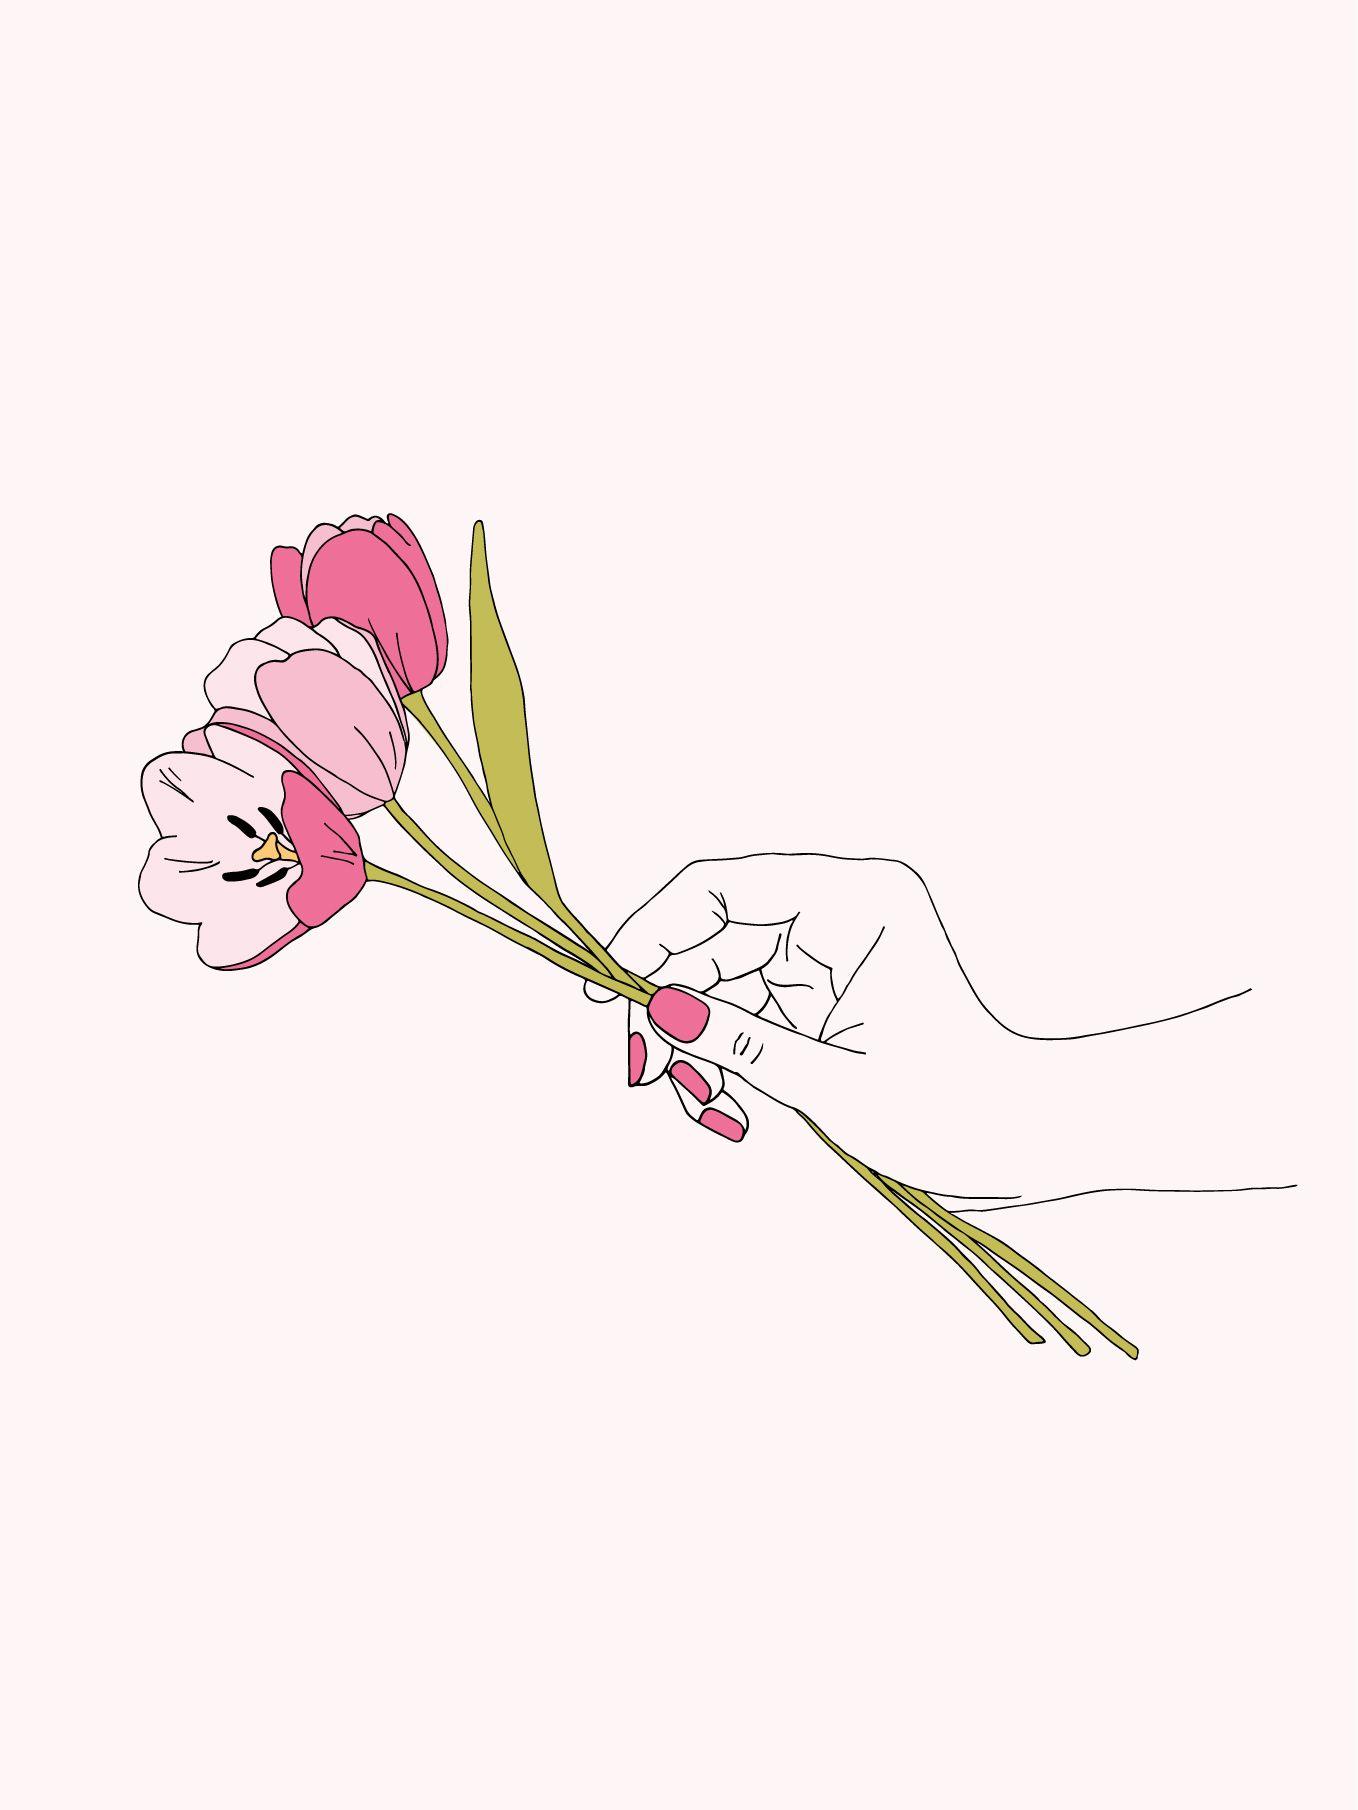 Bouquet desktop and iPad wallpaper. Flower drawing, Realistic flower drawing, Hands holding flowers